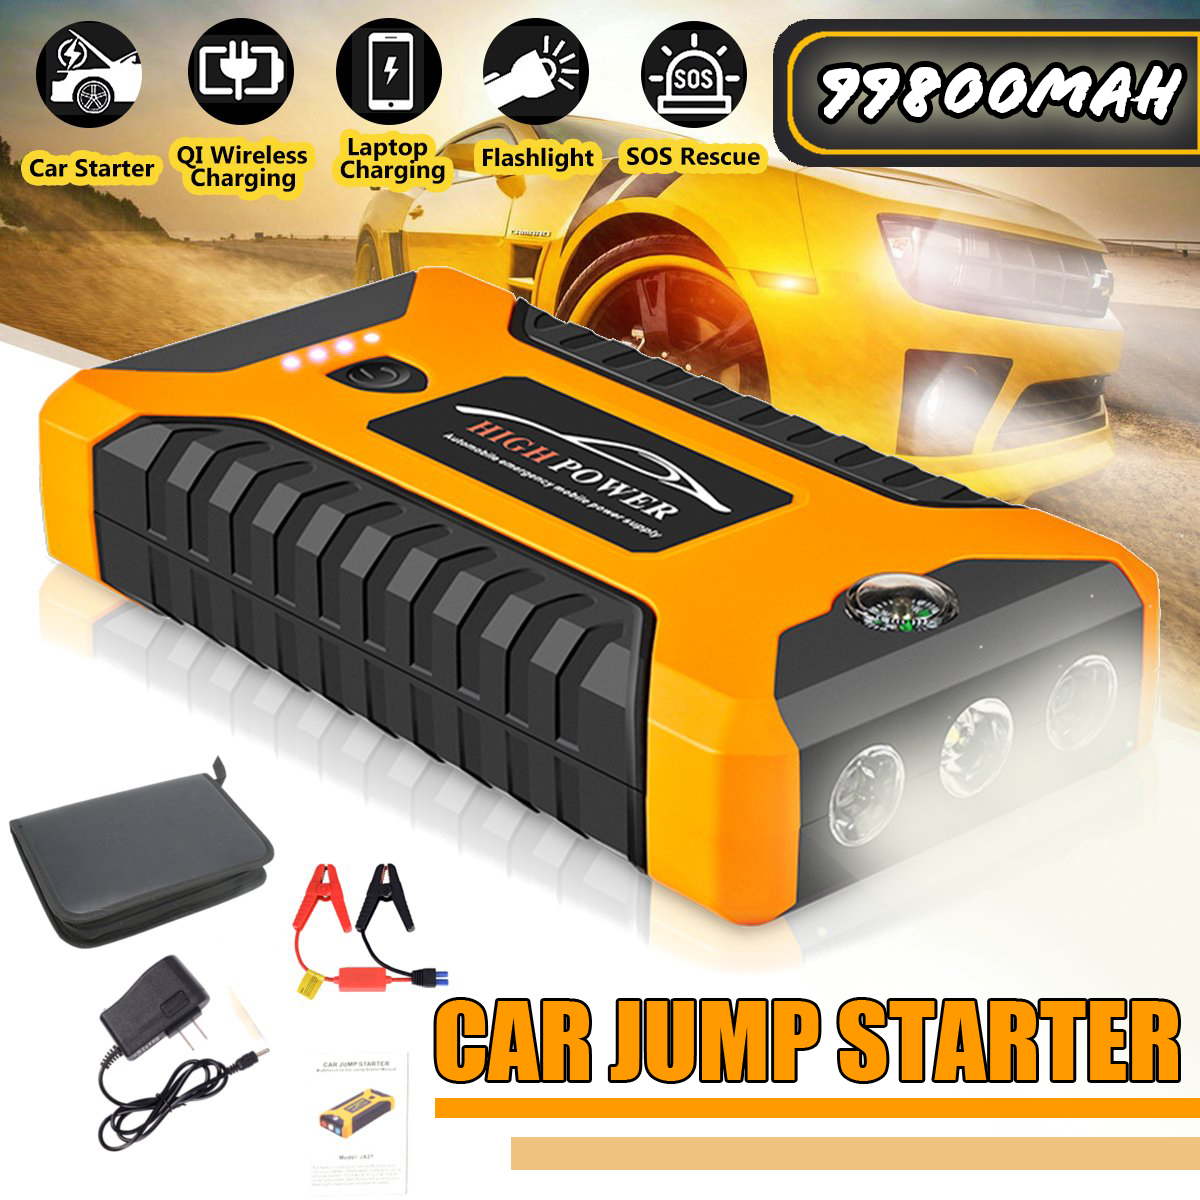 99800mah 600A Peak Car Jump Starter Lithium Battery with LED SOS Mode 12V Auto Battery Booster 5